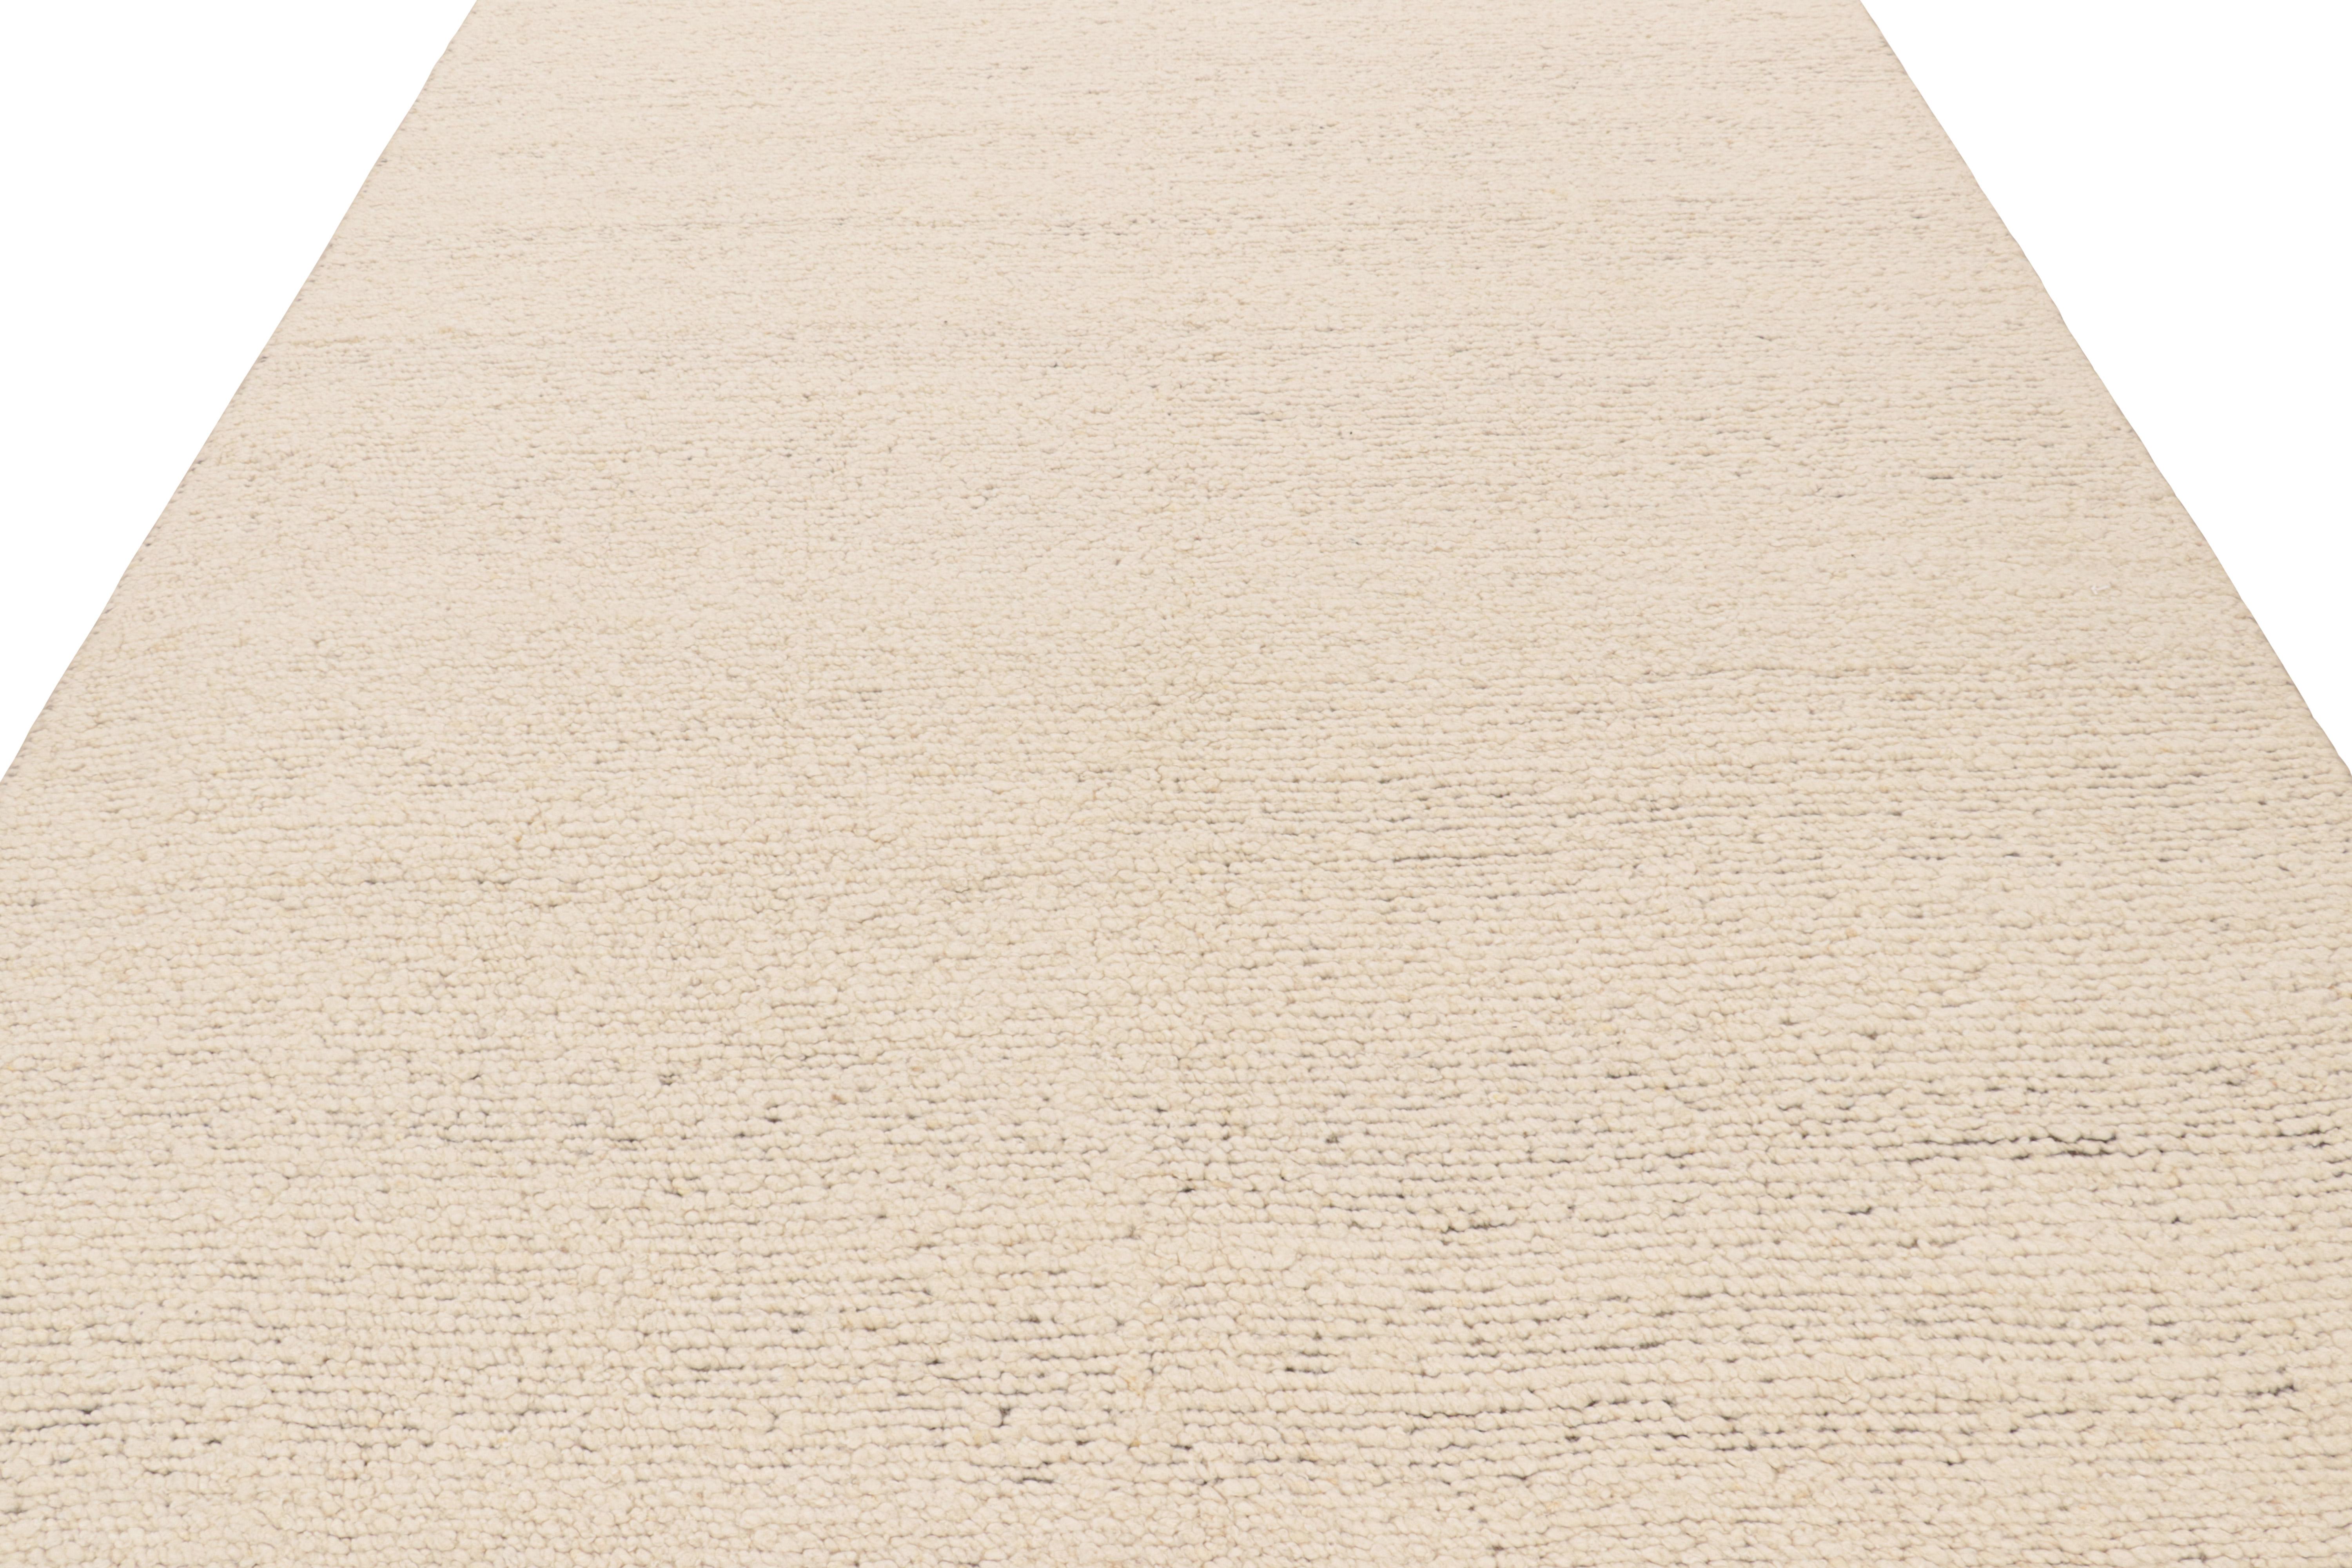 Indian Rug & Kilim’s Textural Kilim in Solid Cream and White Tones For Sale